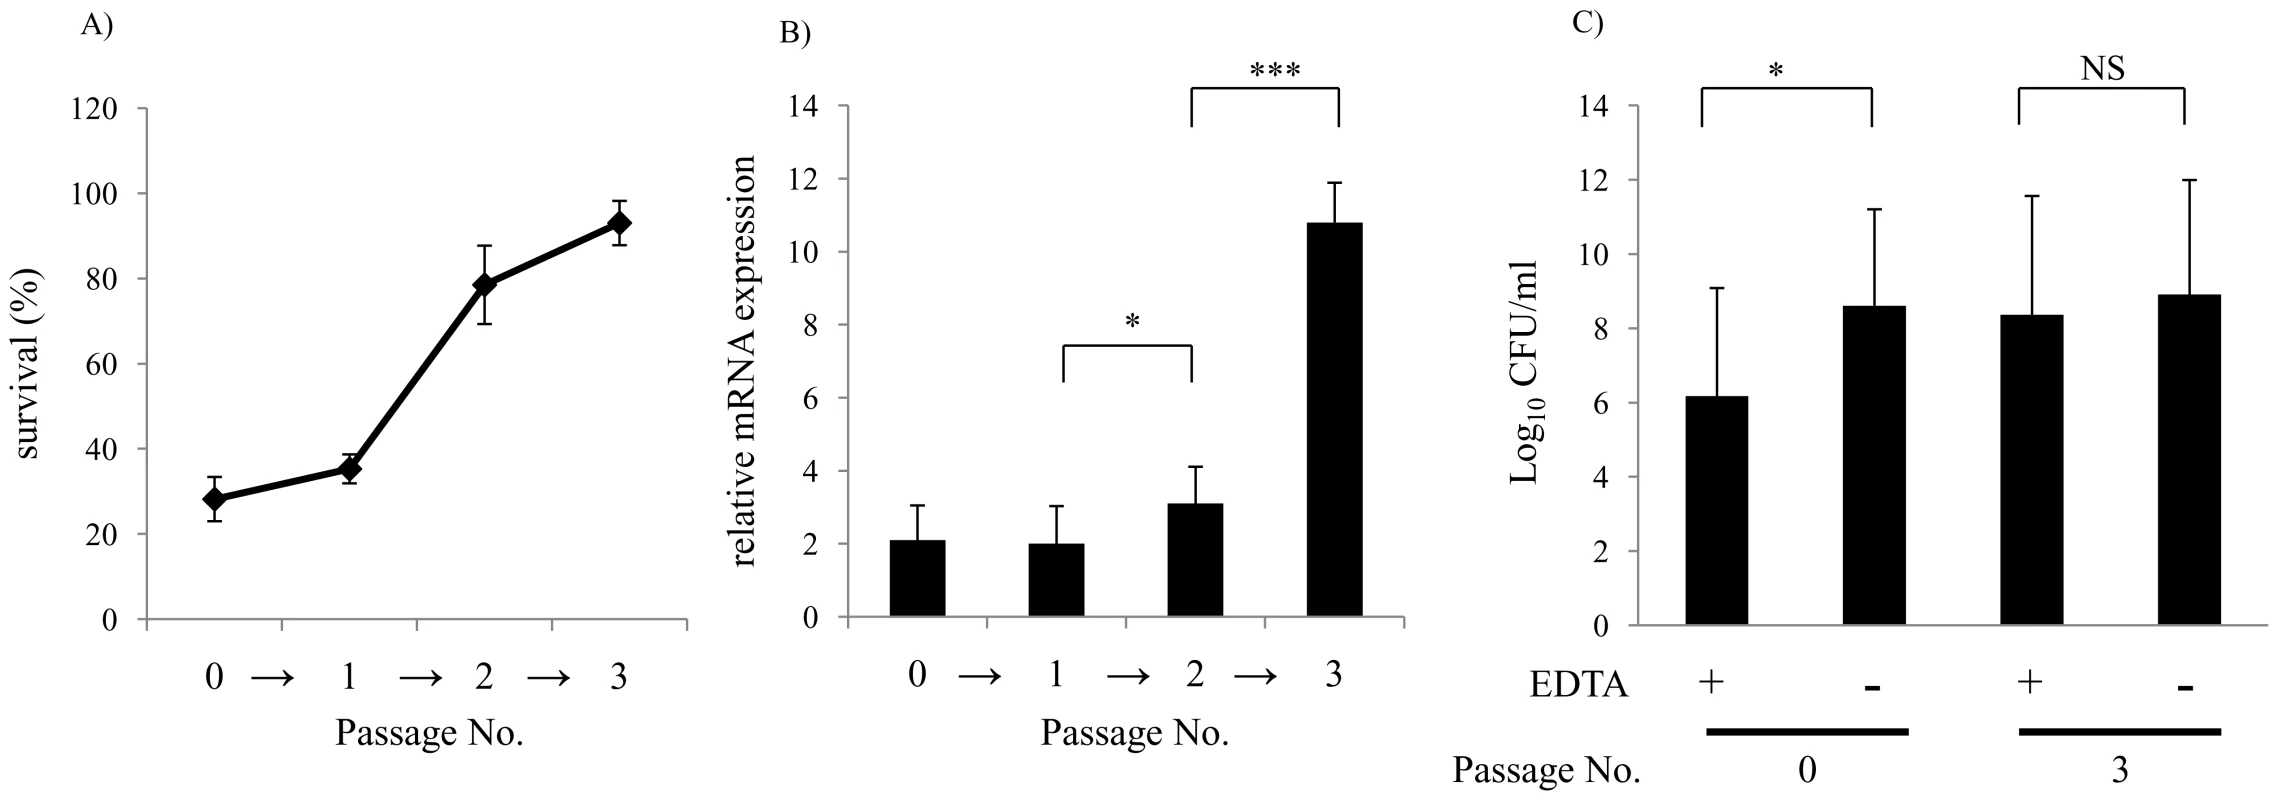 Repeated serum treatment selects for serum resistance, increased <i>vacJ</i> expression, and increased outer membrane stability.